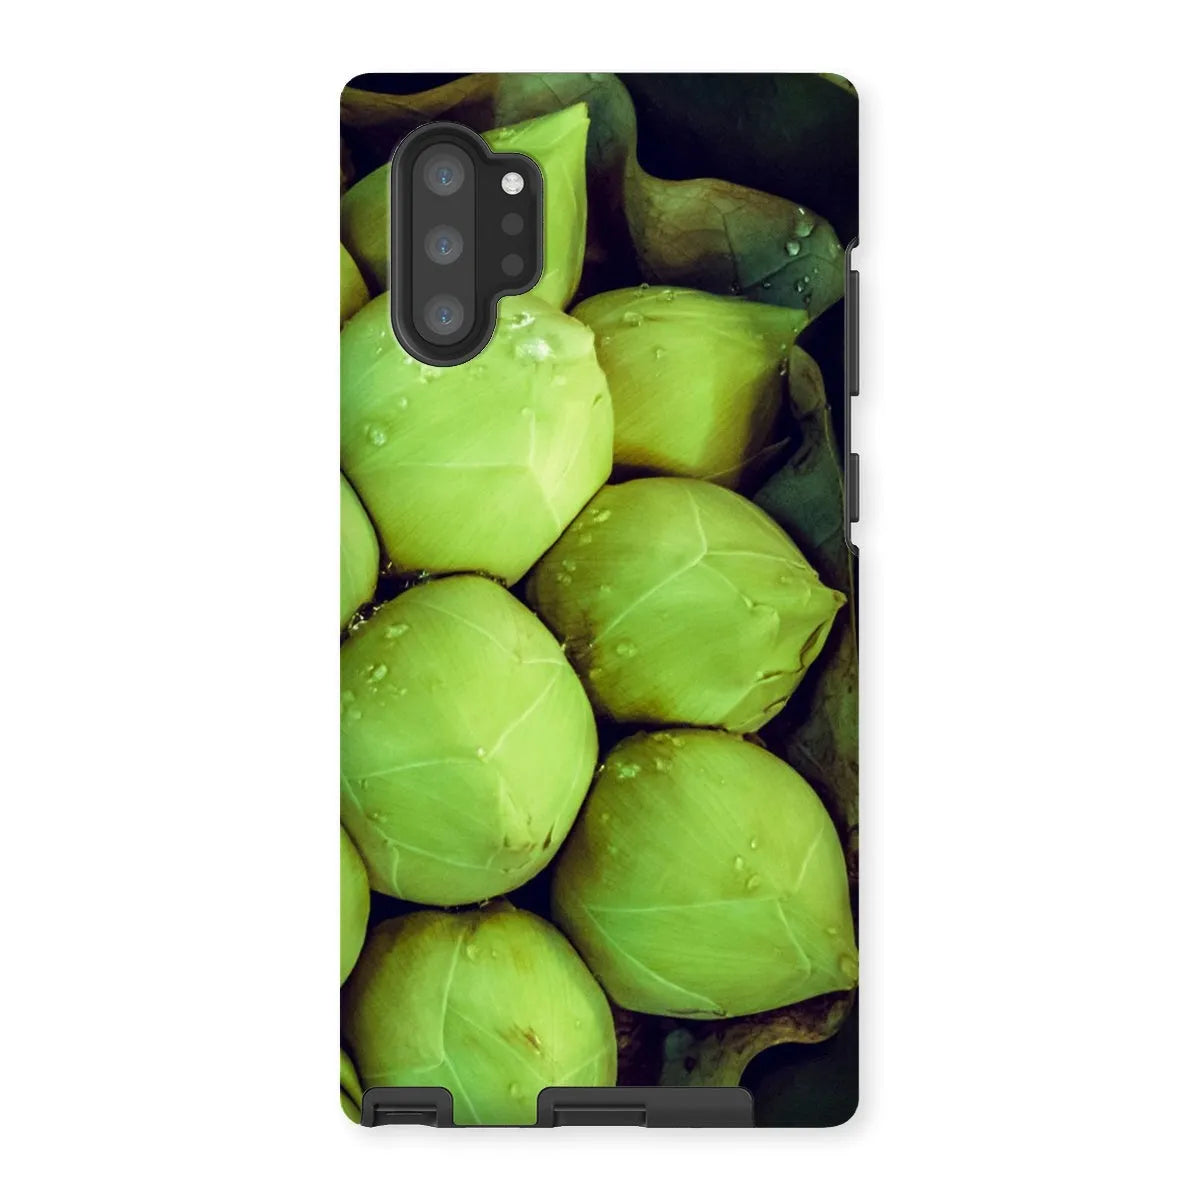 Ingenues Tough Phone Case - Samsung Galaxy Note 10p / Matte - Mobile Phone Cases - Aesthetic Art